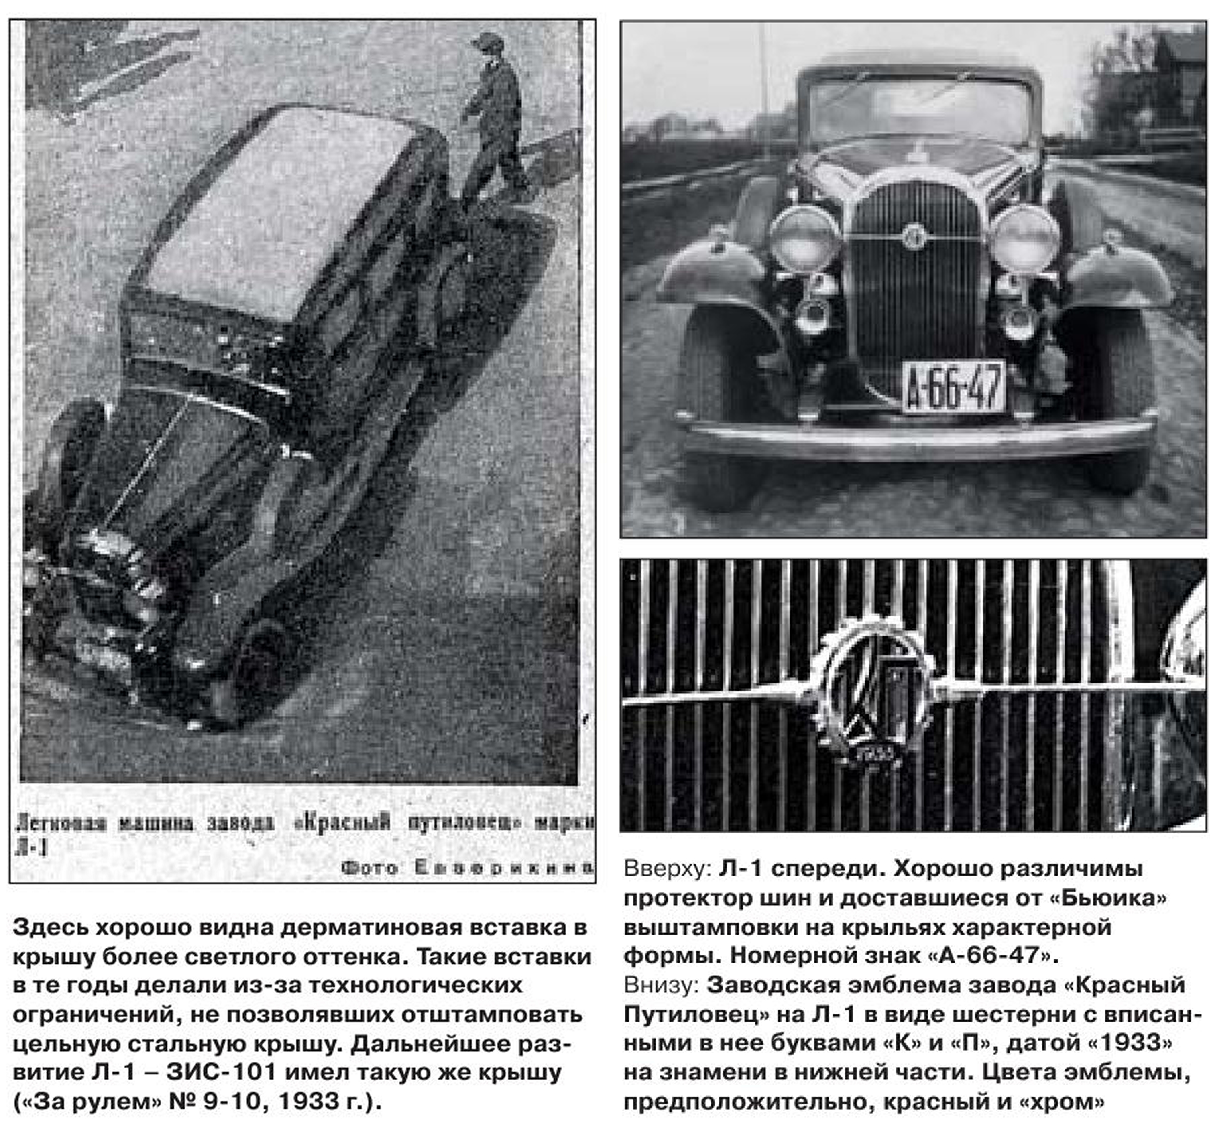 The short life of the Soviet Buik. - My, Auto, Soviet car industry, Picture with text, The photo, Scale model, 1:43, Copy-paste, Longpost, Domestic auto industry